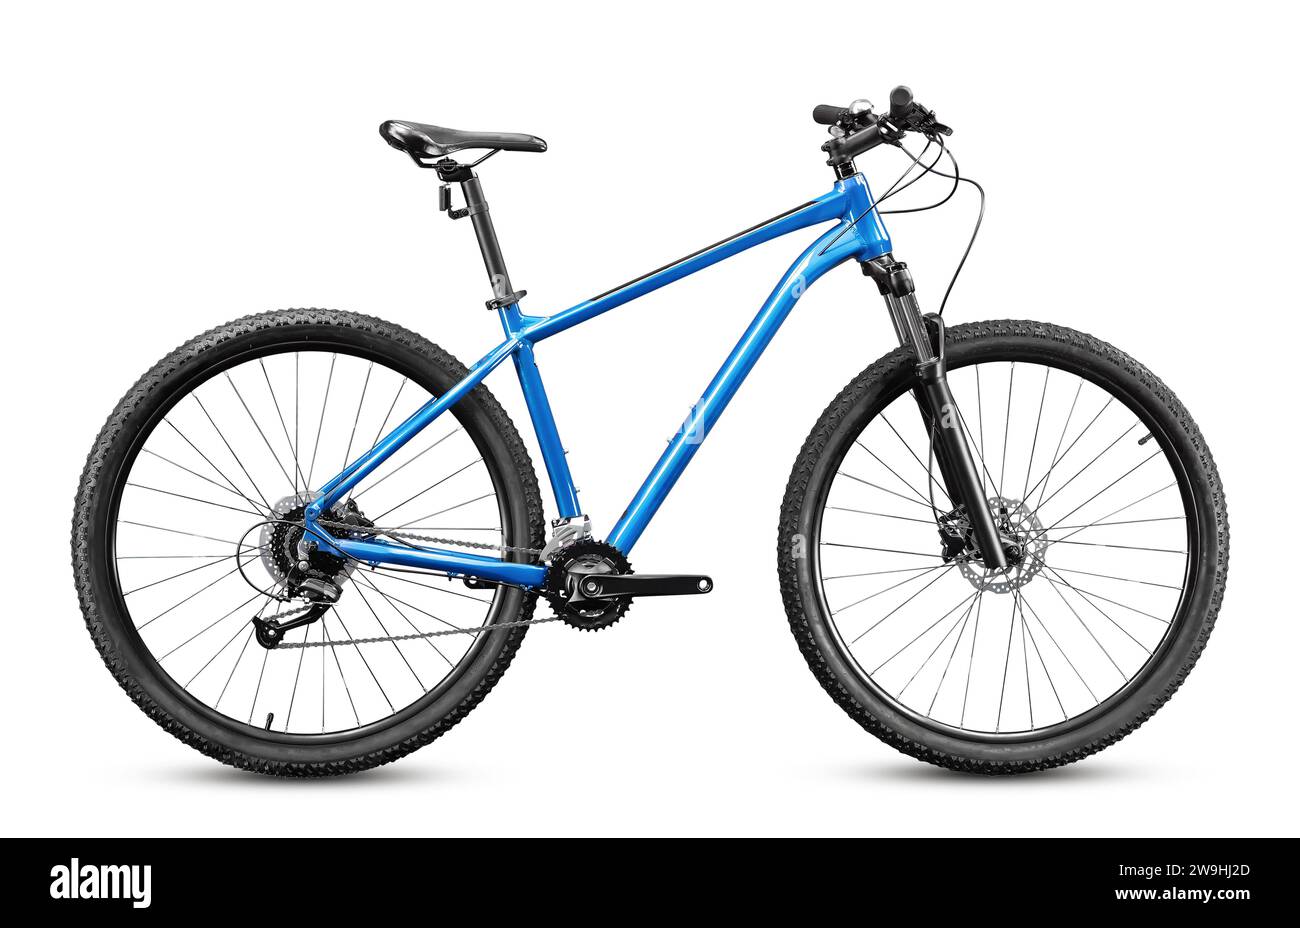 New cross country mountain bicycle with 29 inches wheels and blue frame isolated on white background. Stock Photo